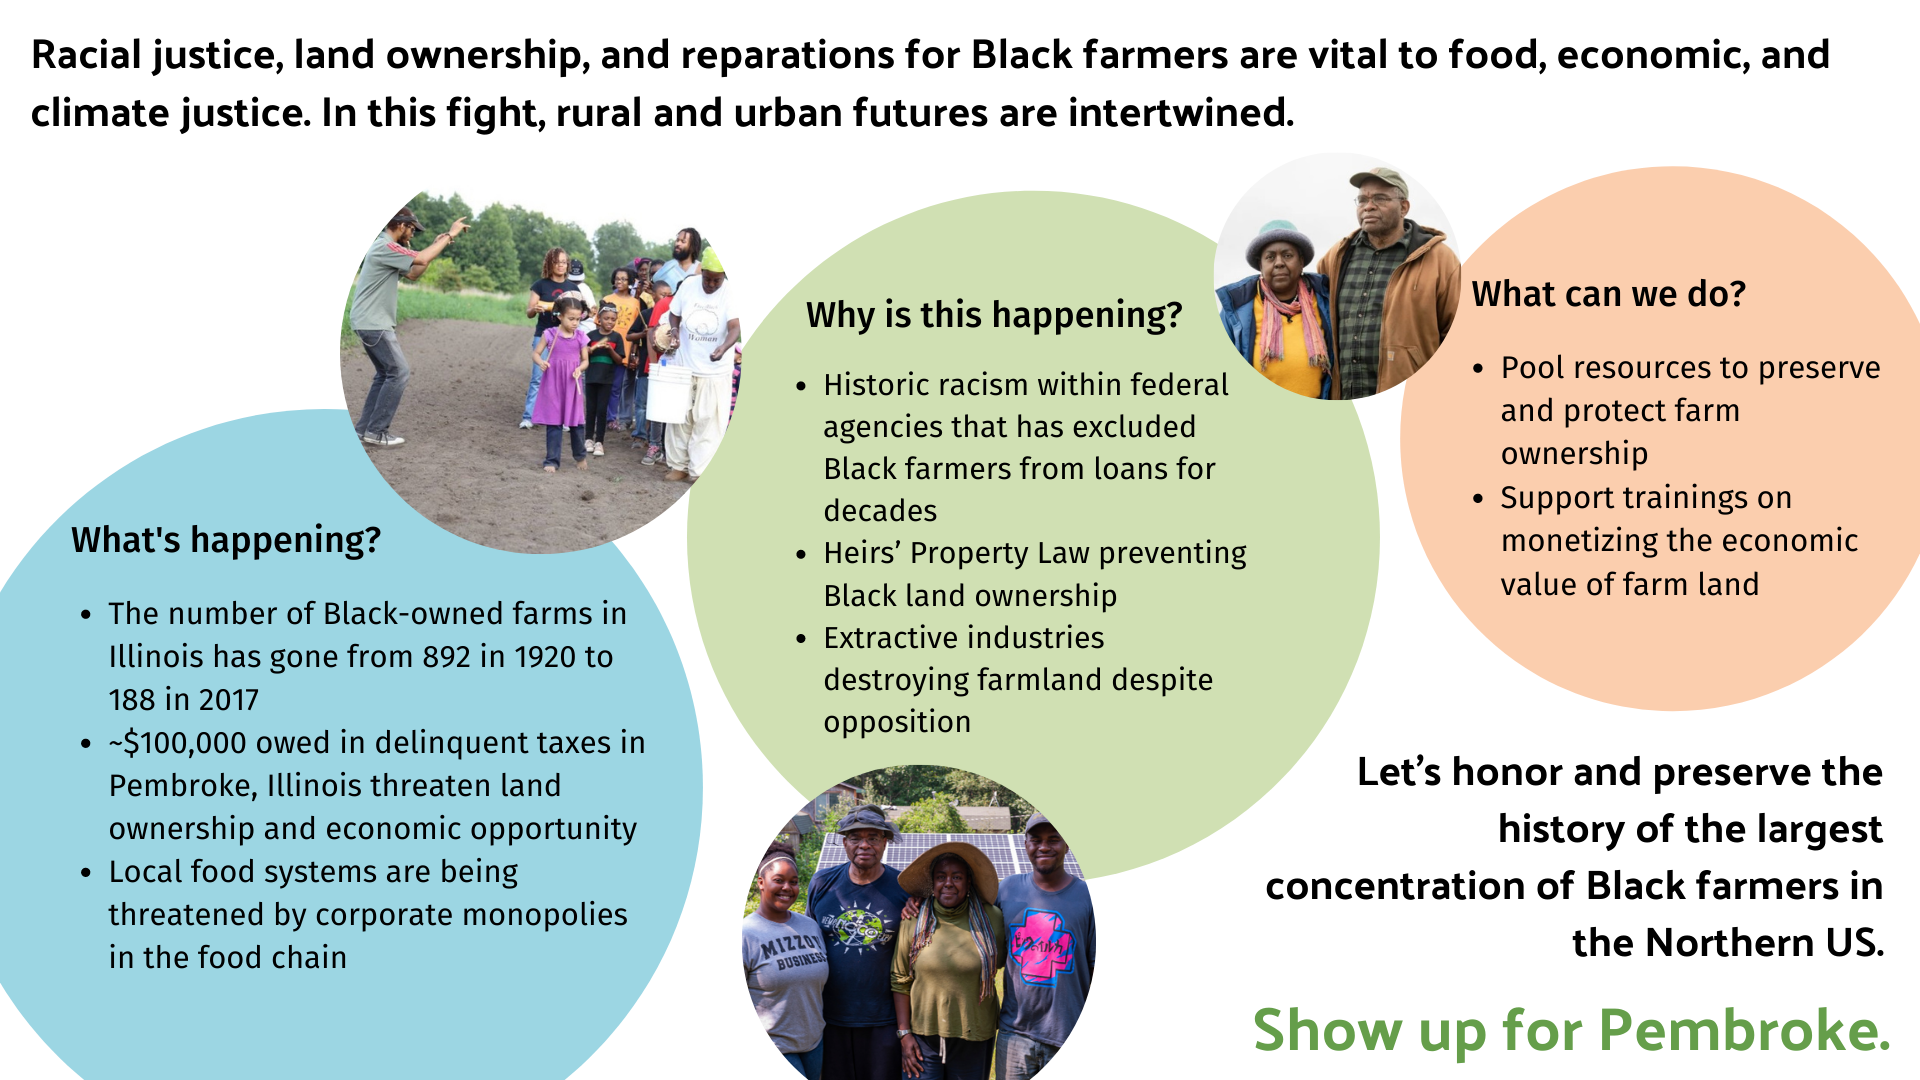 Summary of graphic with pictures of Black farmers in the northern US: Racial justice, land ownership, and reparations for Black farmers are vital to food, economic, and climate justice. In this fight, rural and urban futures are intertwined.